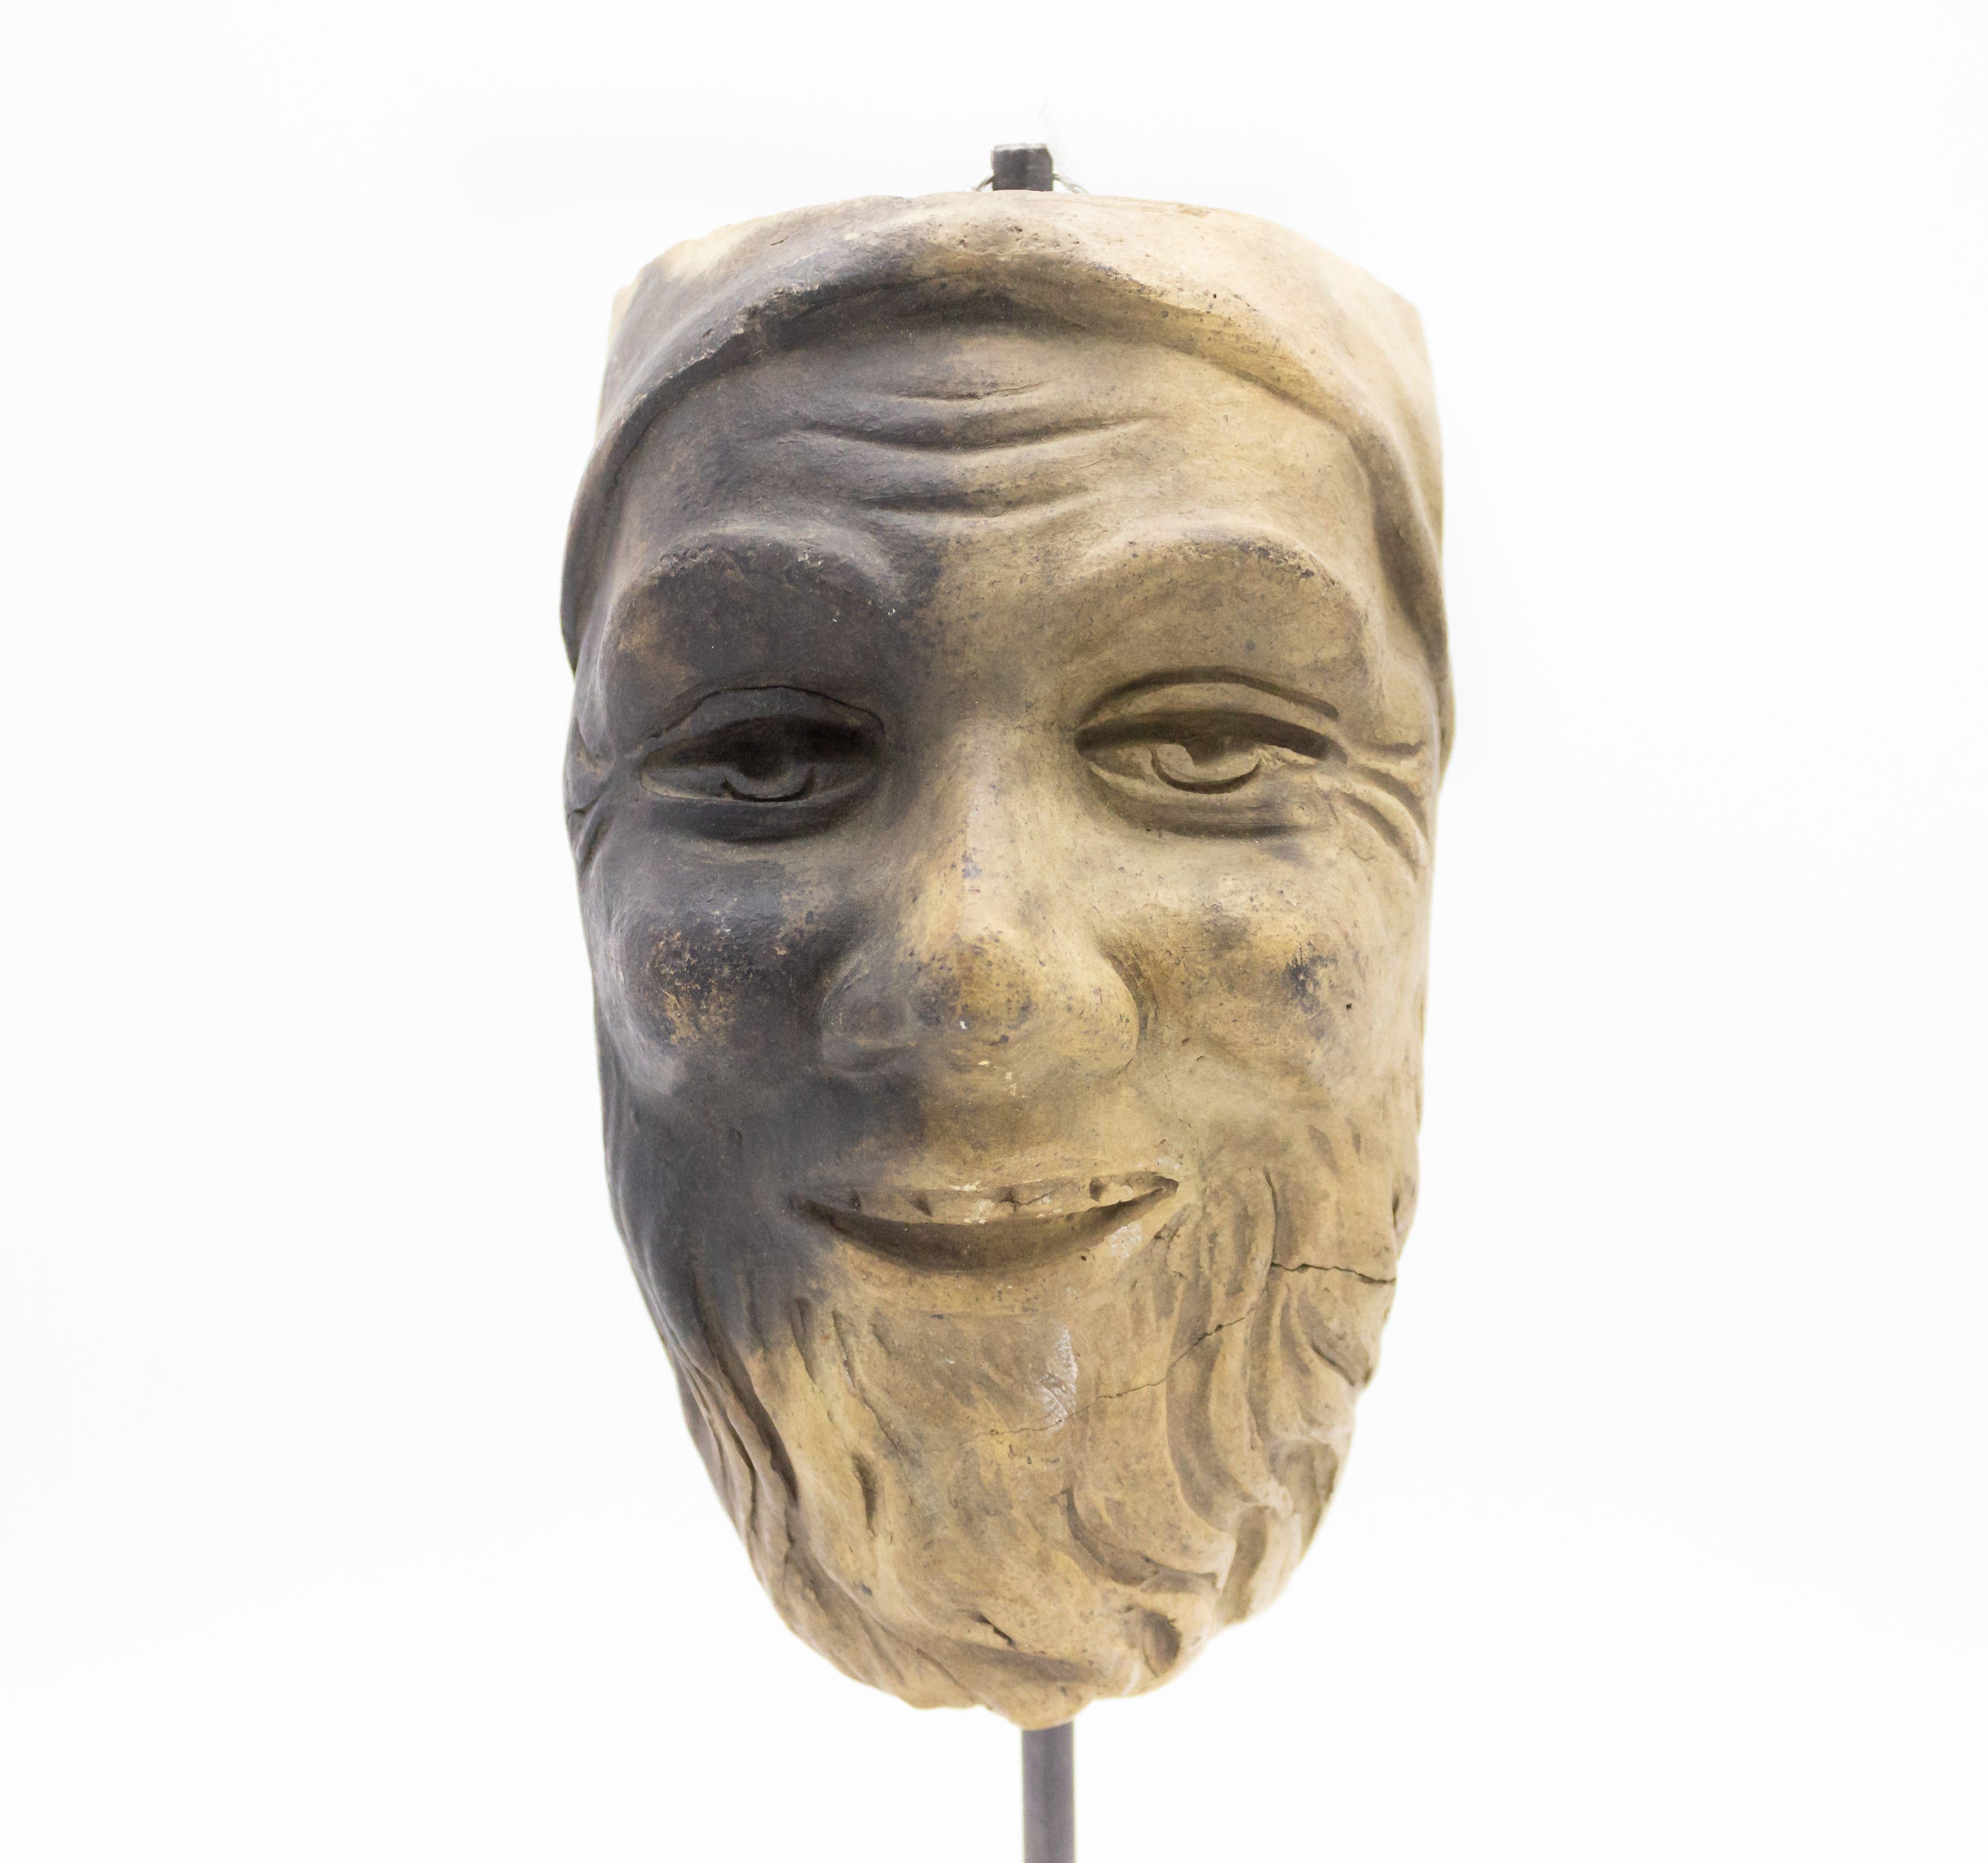 Continental German (late 19th cent) sculpted terra-cotta master mask mold of a smiling man with a beard and cap displayed on a square black marble base stand (part of a 39 piece collection).
     